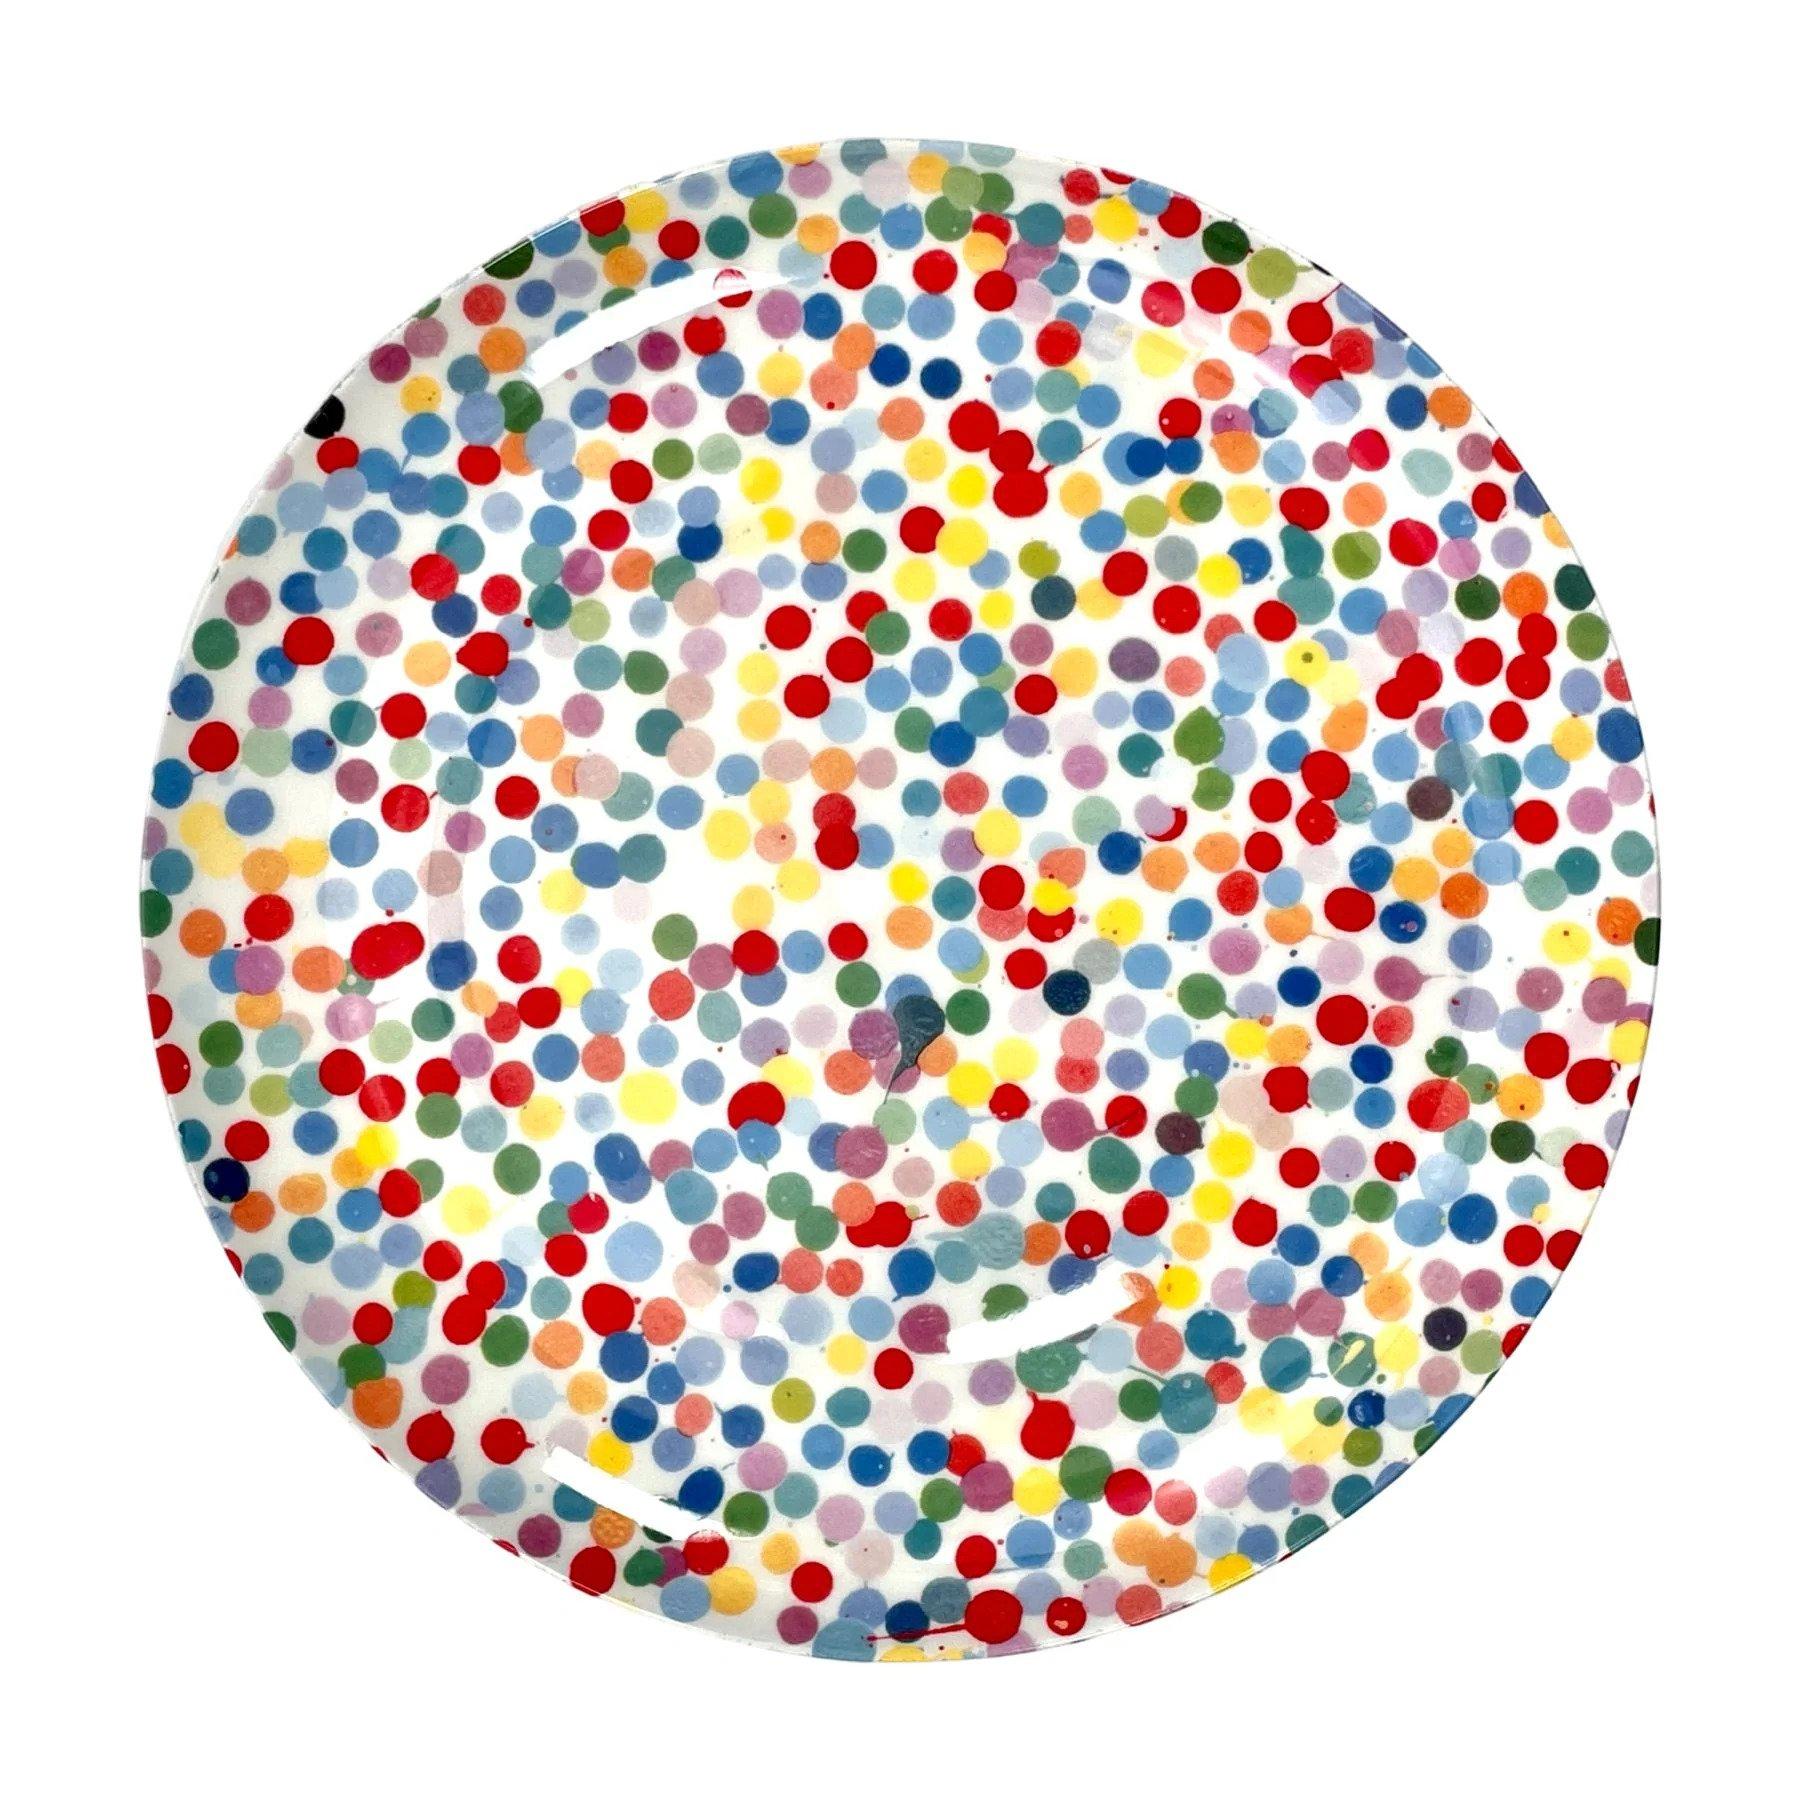 All Over Dot Plate by Damien Hirst - Art by (after) Damien Hirst